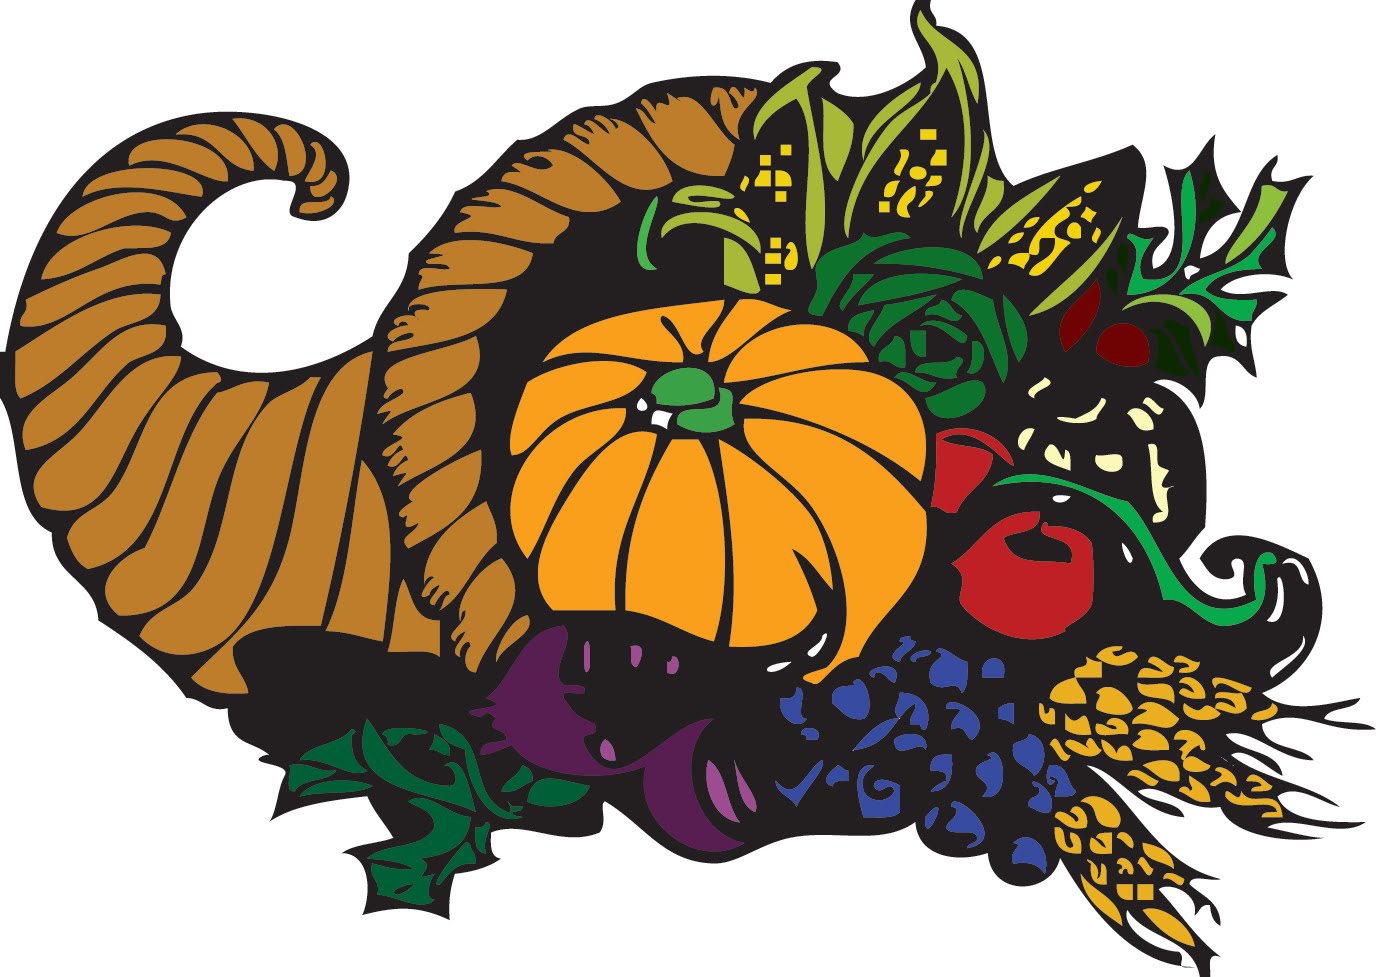 Here is Thanksgiving clip art